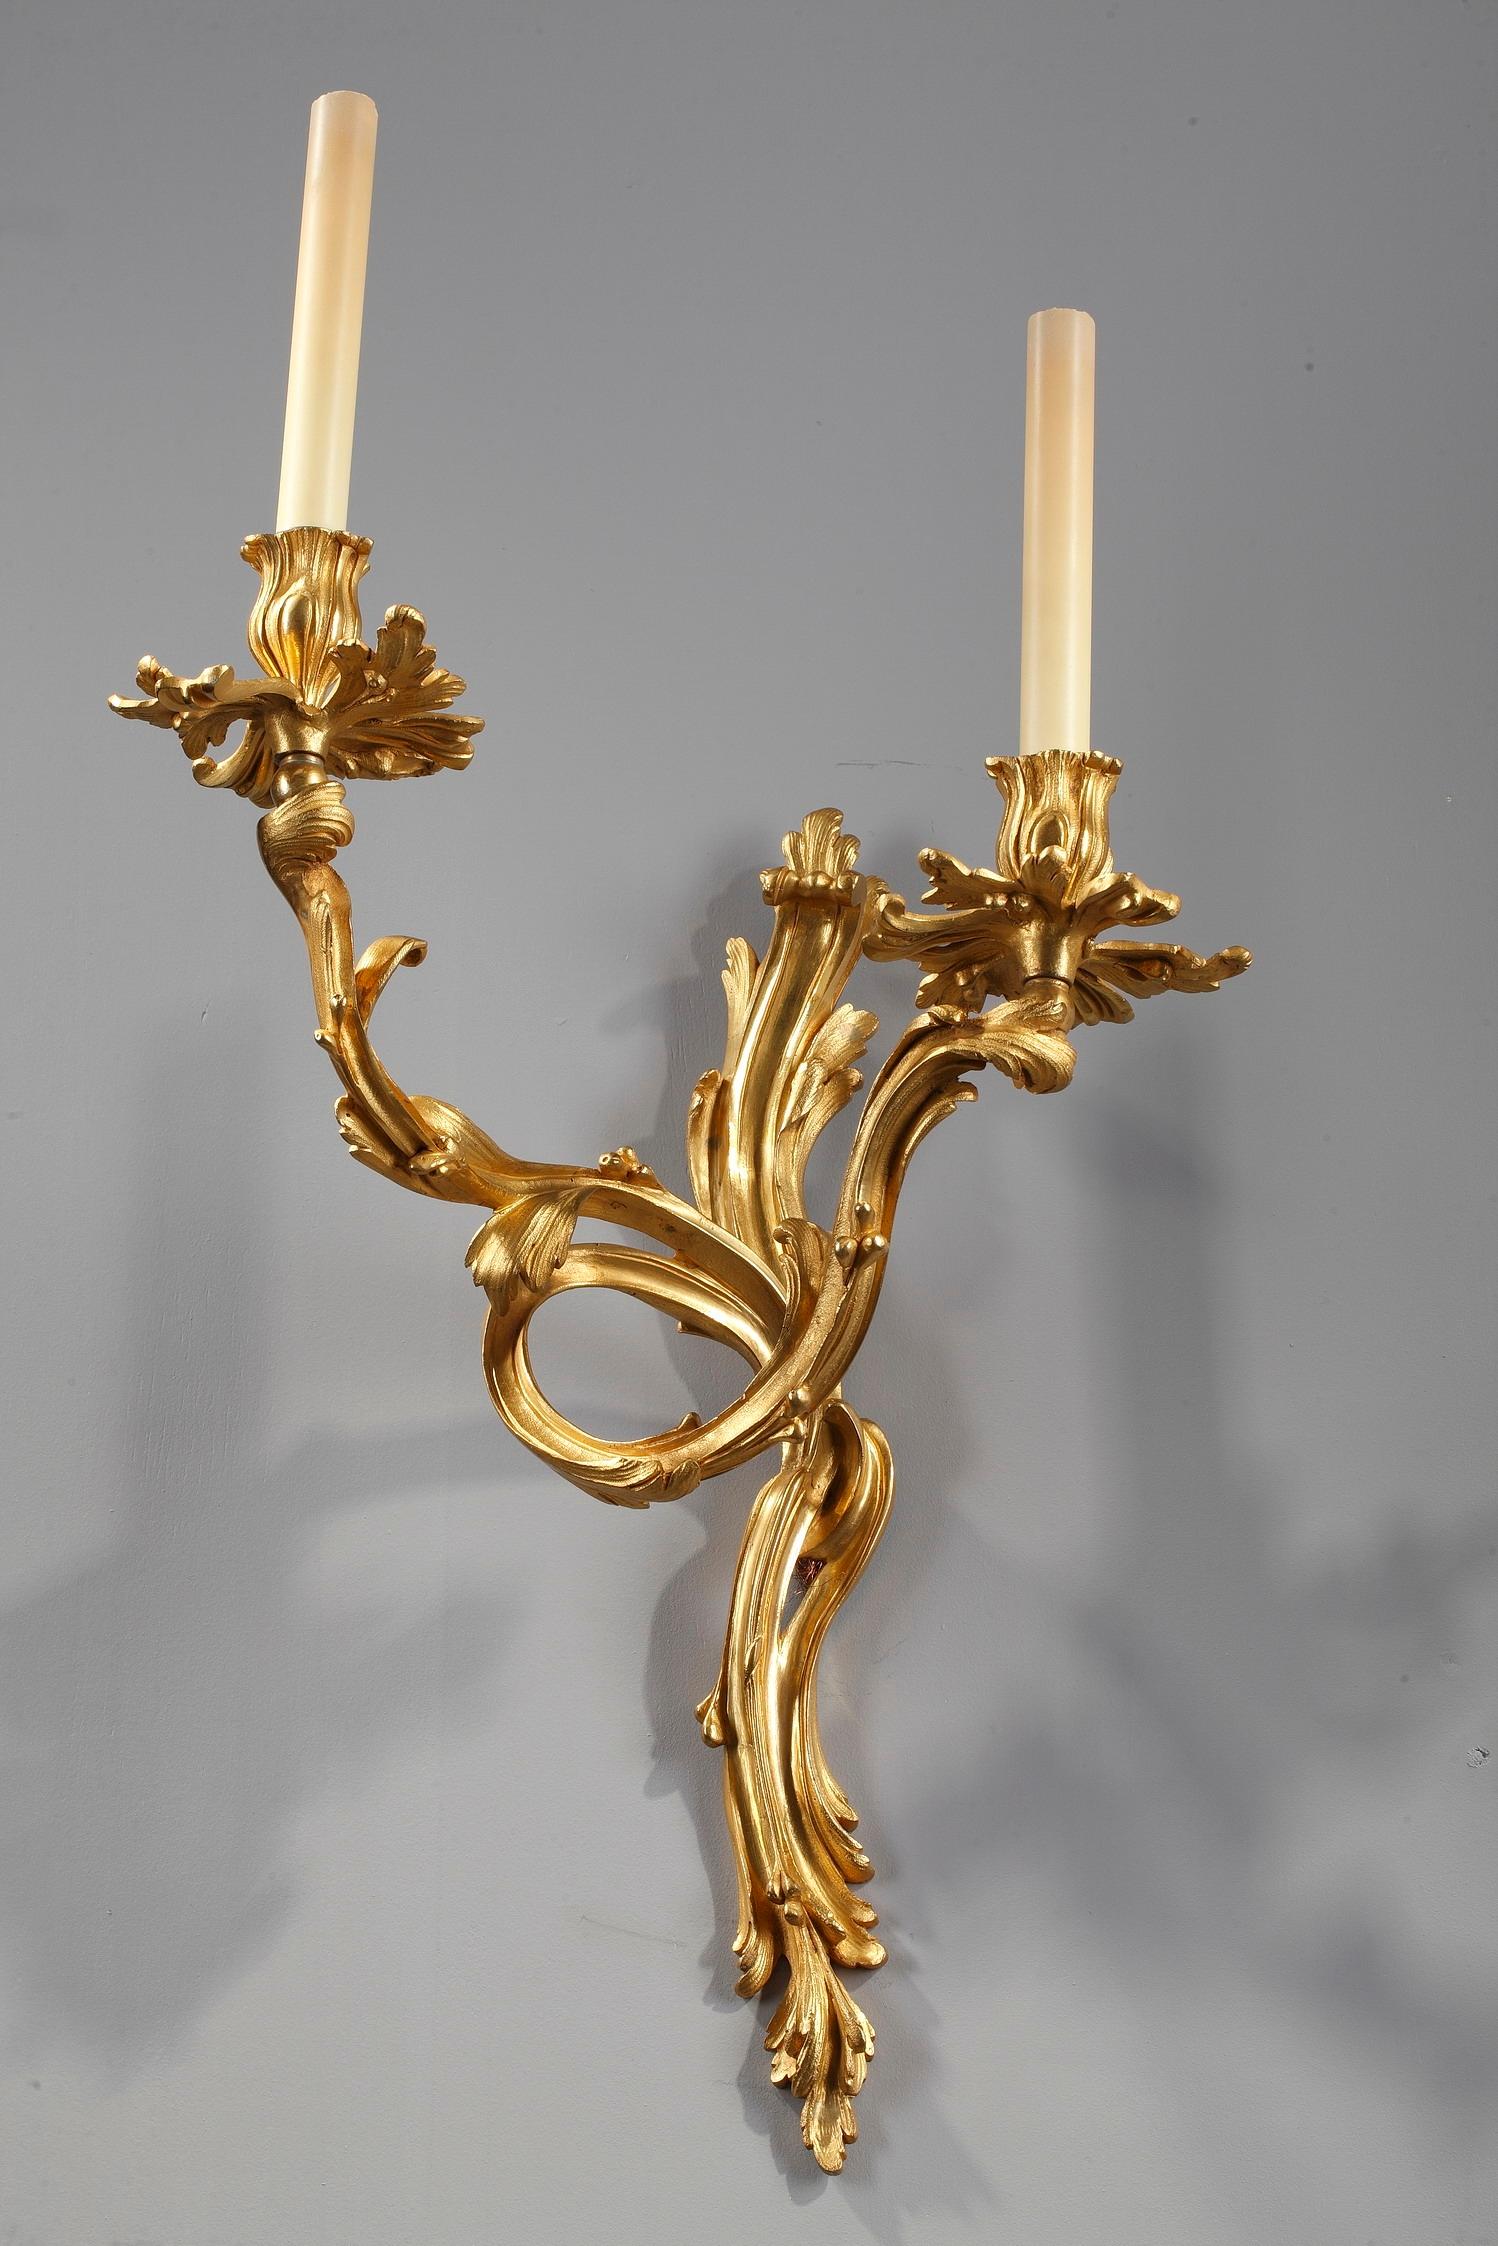 Napoleon III large pair of chiseled and gilt bronze two-light antique wall sconces sculpted with flowing foliage and scrolls in Louis XV style. This Rococo decor is dominated by asymmetrical forms, beautiful carving and the taste for